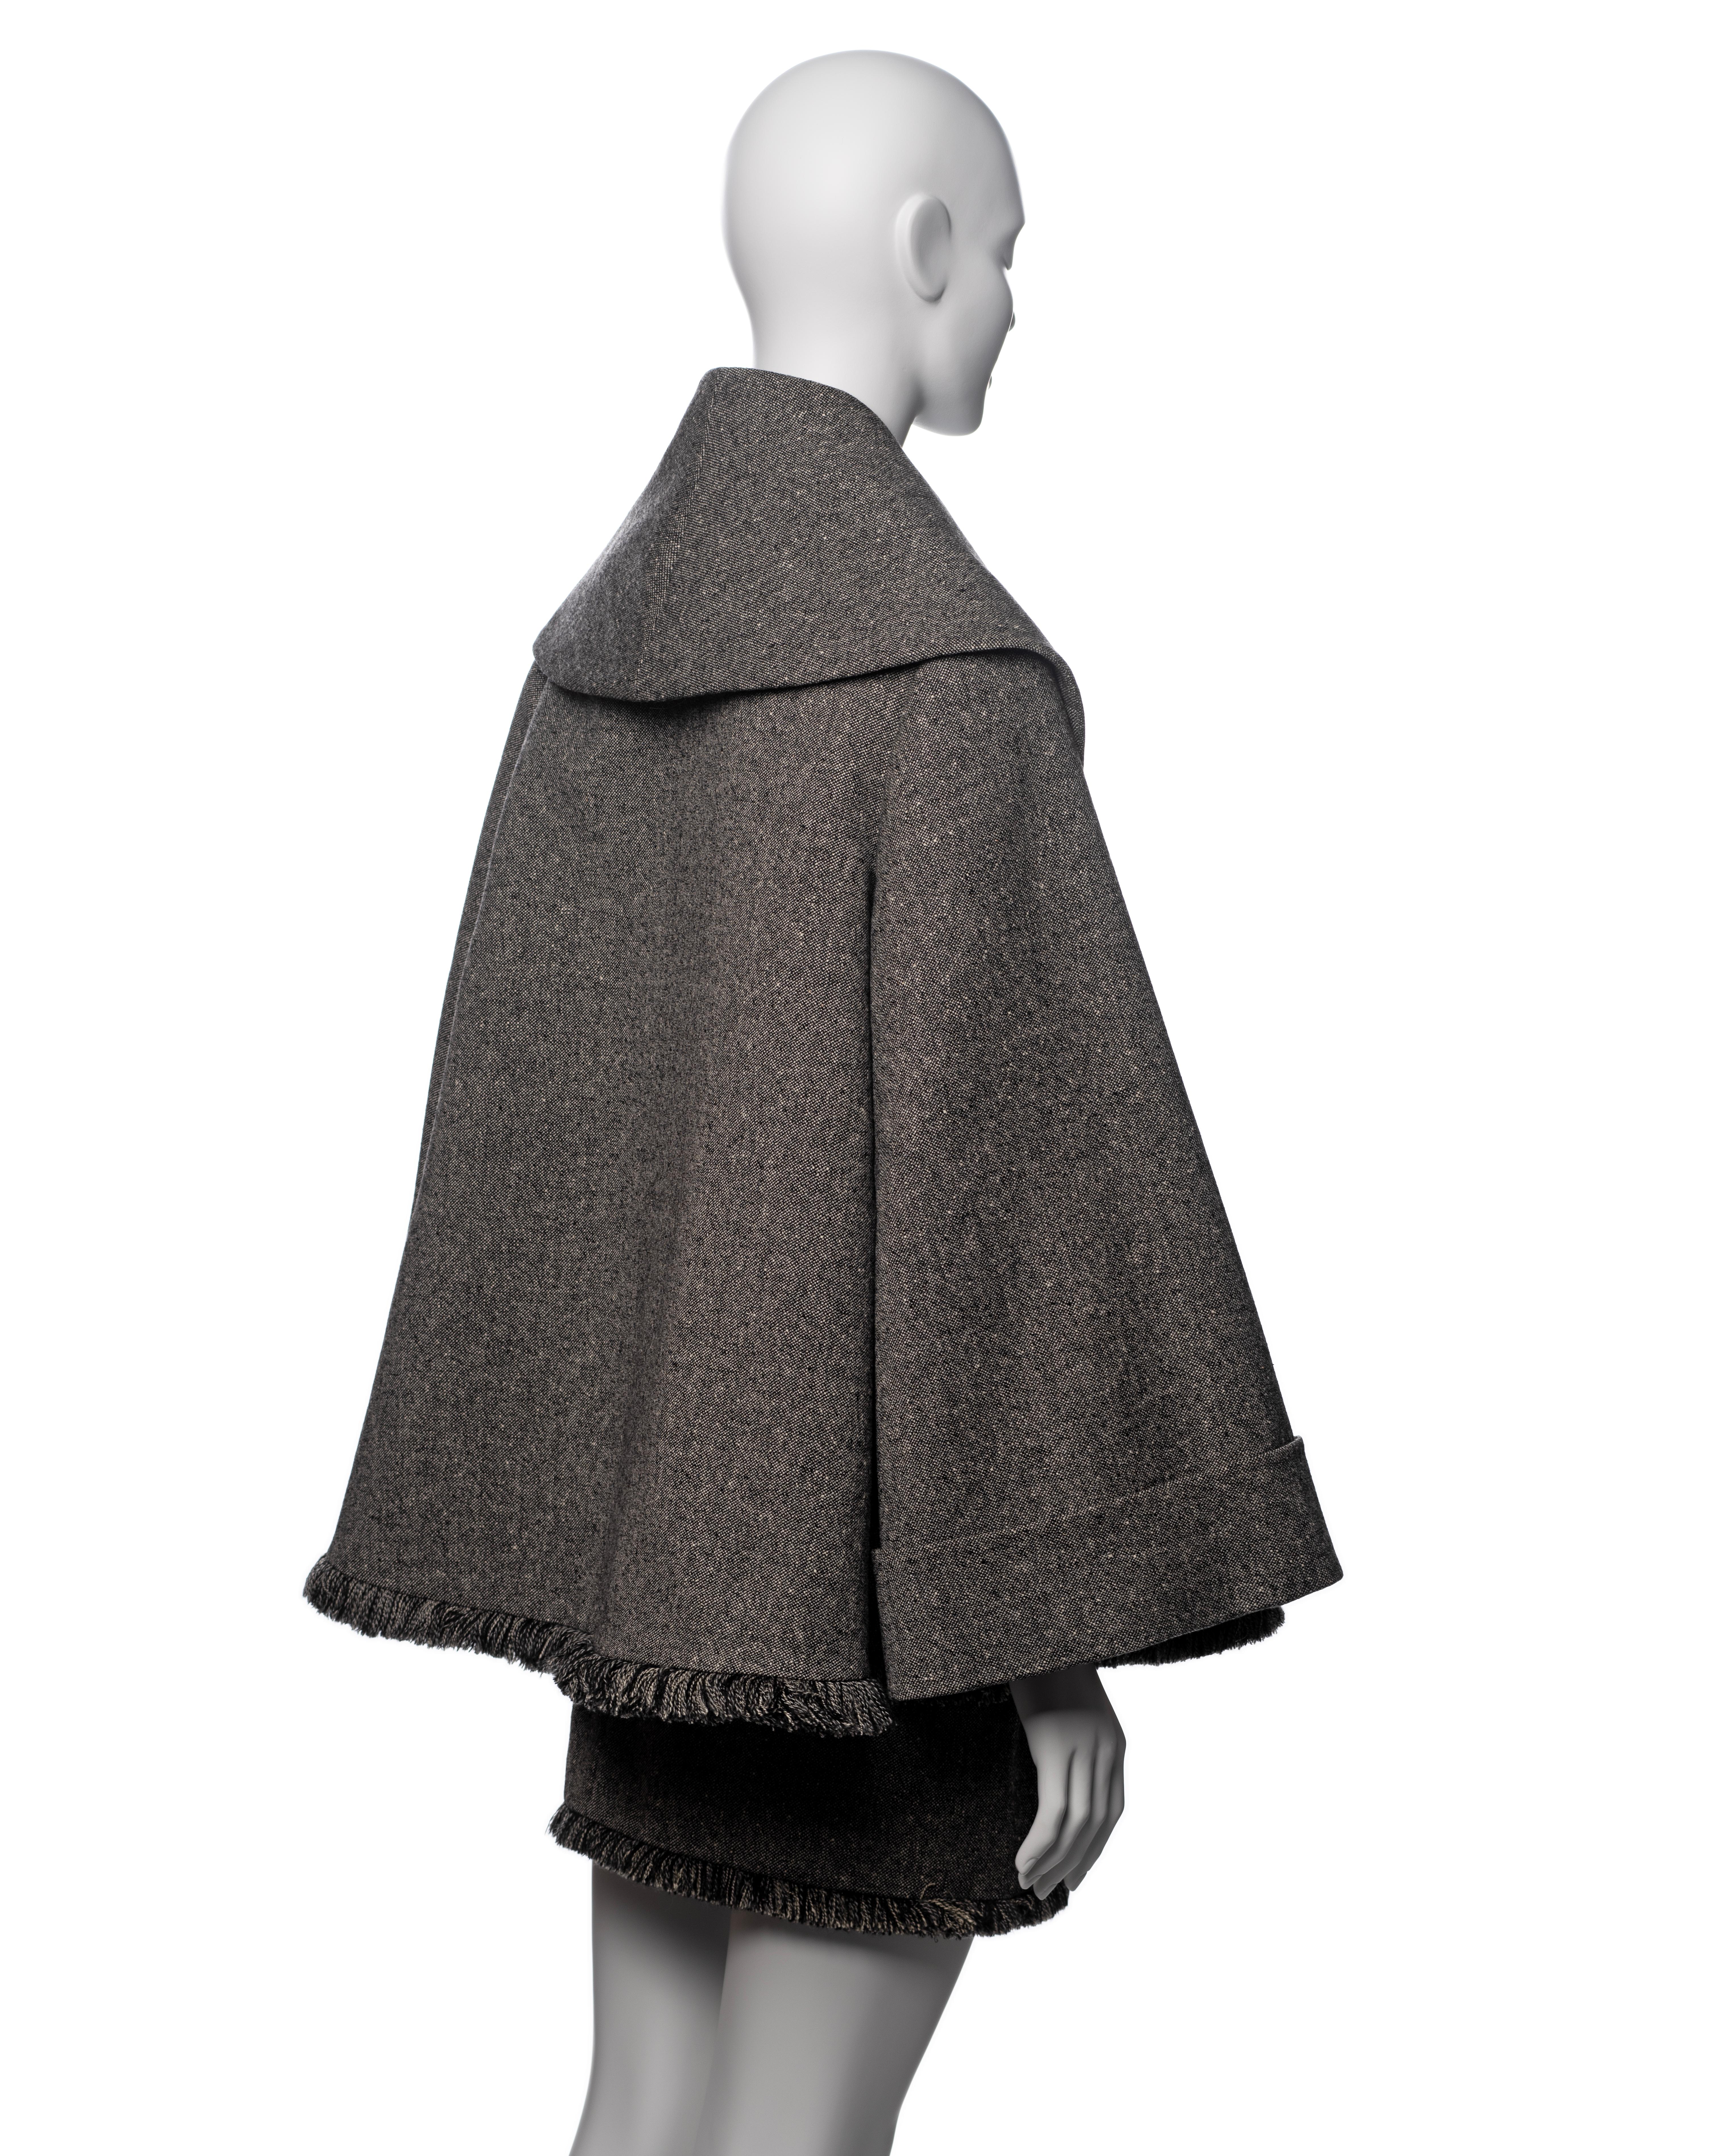 Christian Dior by John Galliano Grey Tweed Jacket and Mini Skirt Suit, FW 1998 For Sale 5